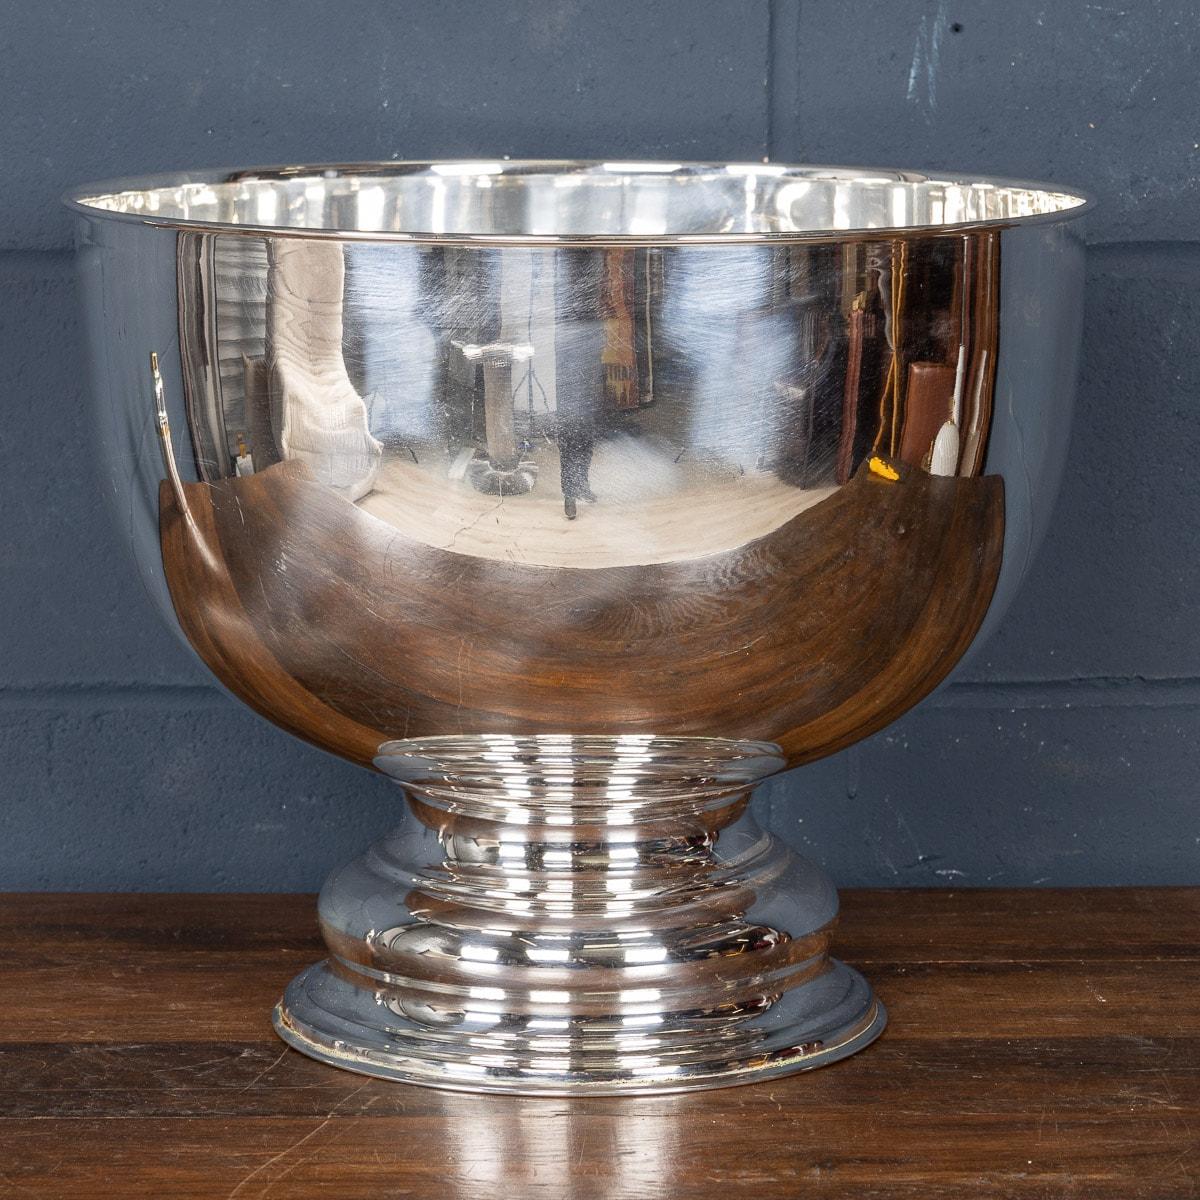 A huge silver plated Rose Bowl made in Sheffield, England by the famous makers James Dixon and Sons. Its majestic dimensions are capable of serving as a massive punchbowl, as a champagne or wine bucket for multiple bottles, or even just as a